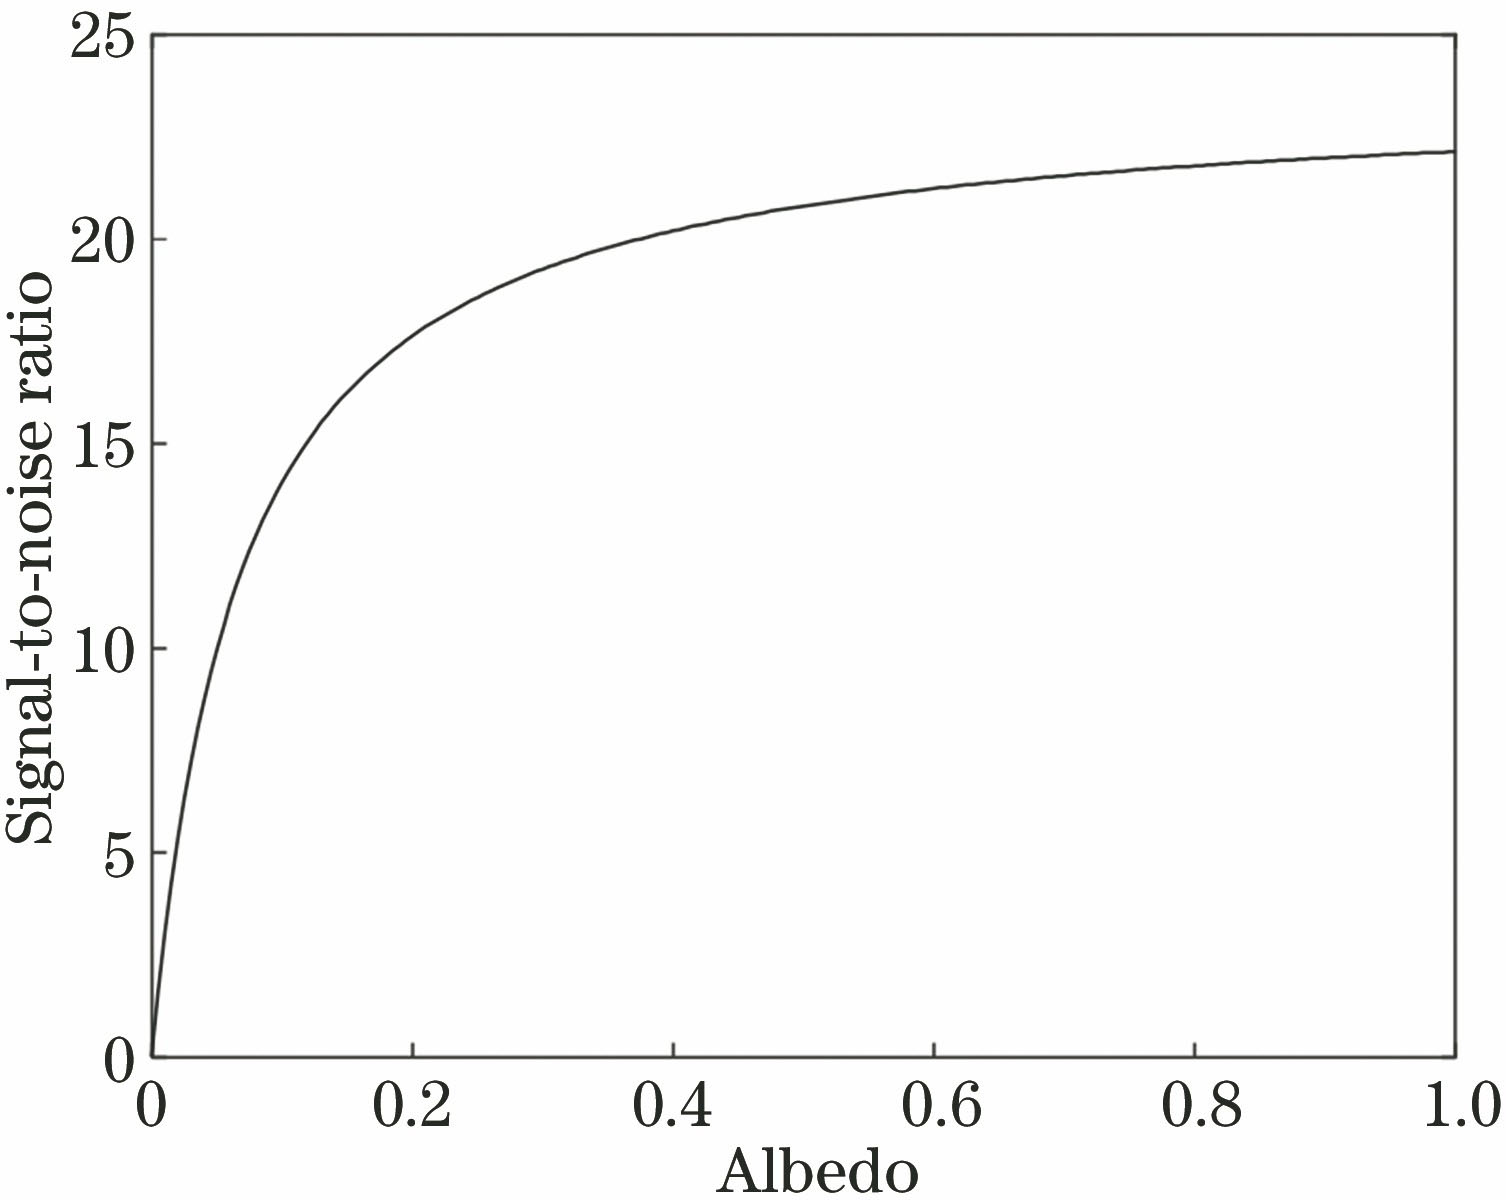 Relationship between signal-to-noise ratio and albedo